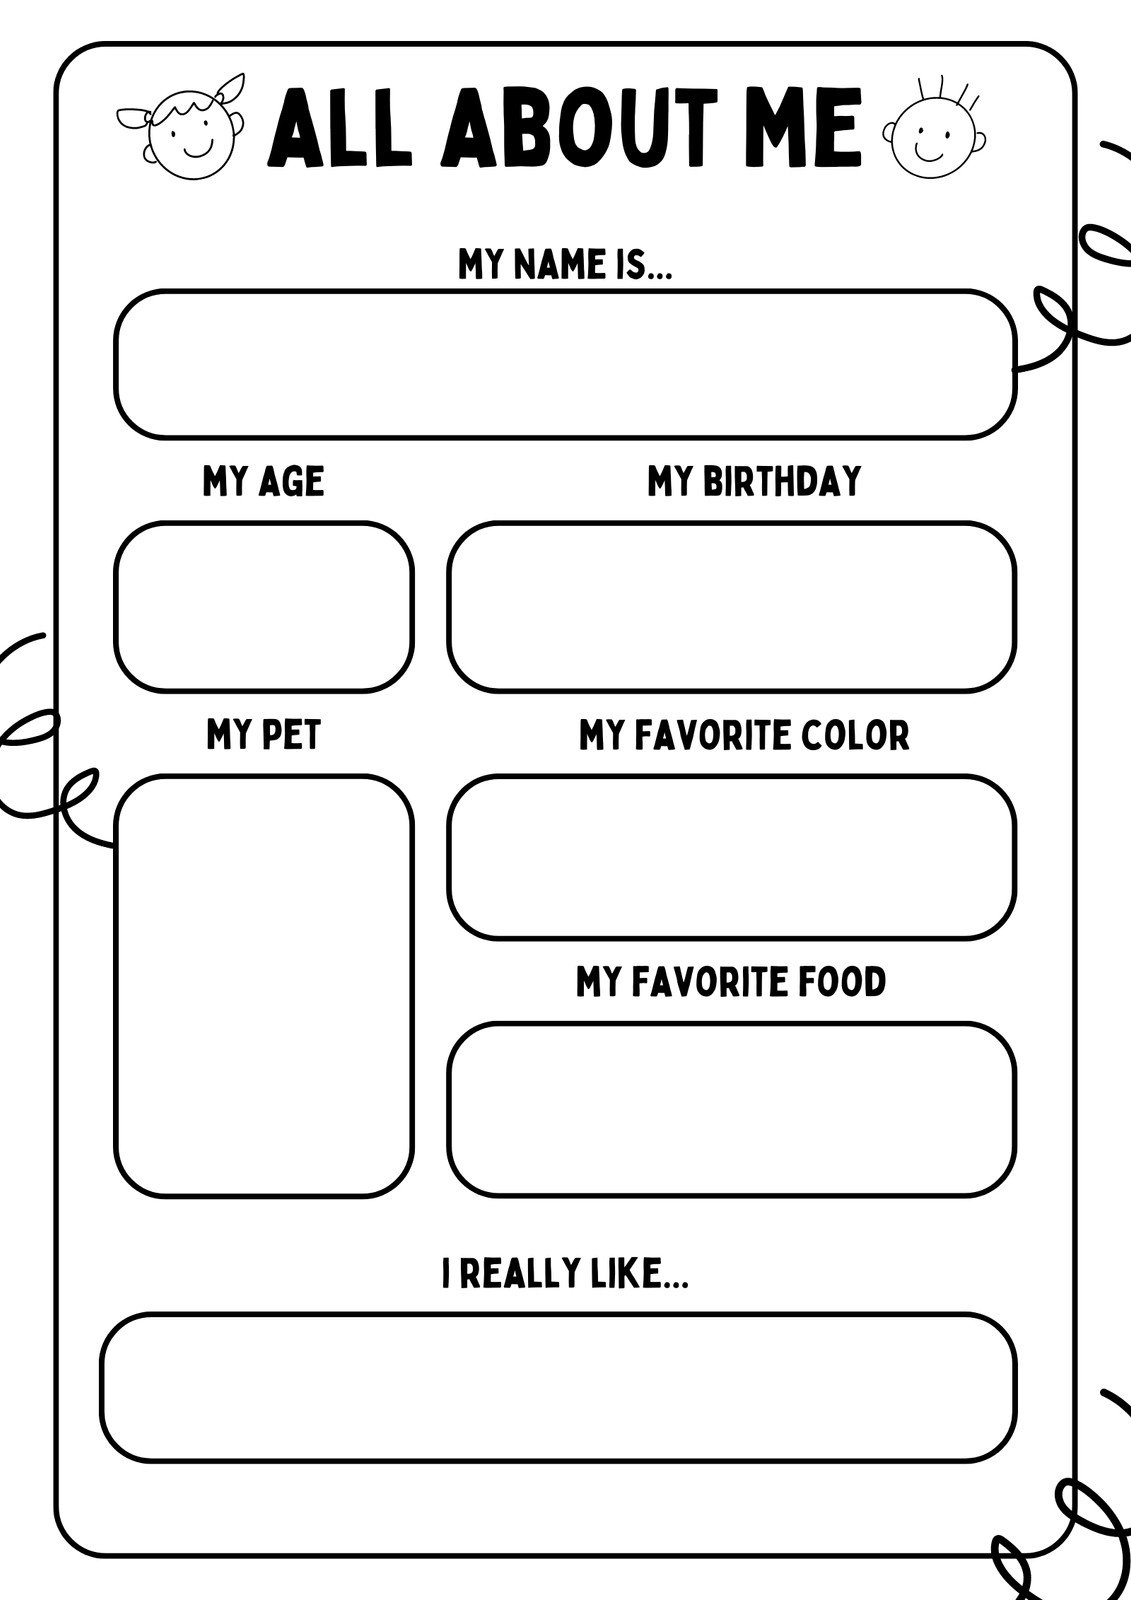 All About Me Free Printable Middle School - Printable Templates